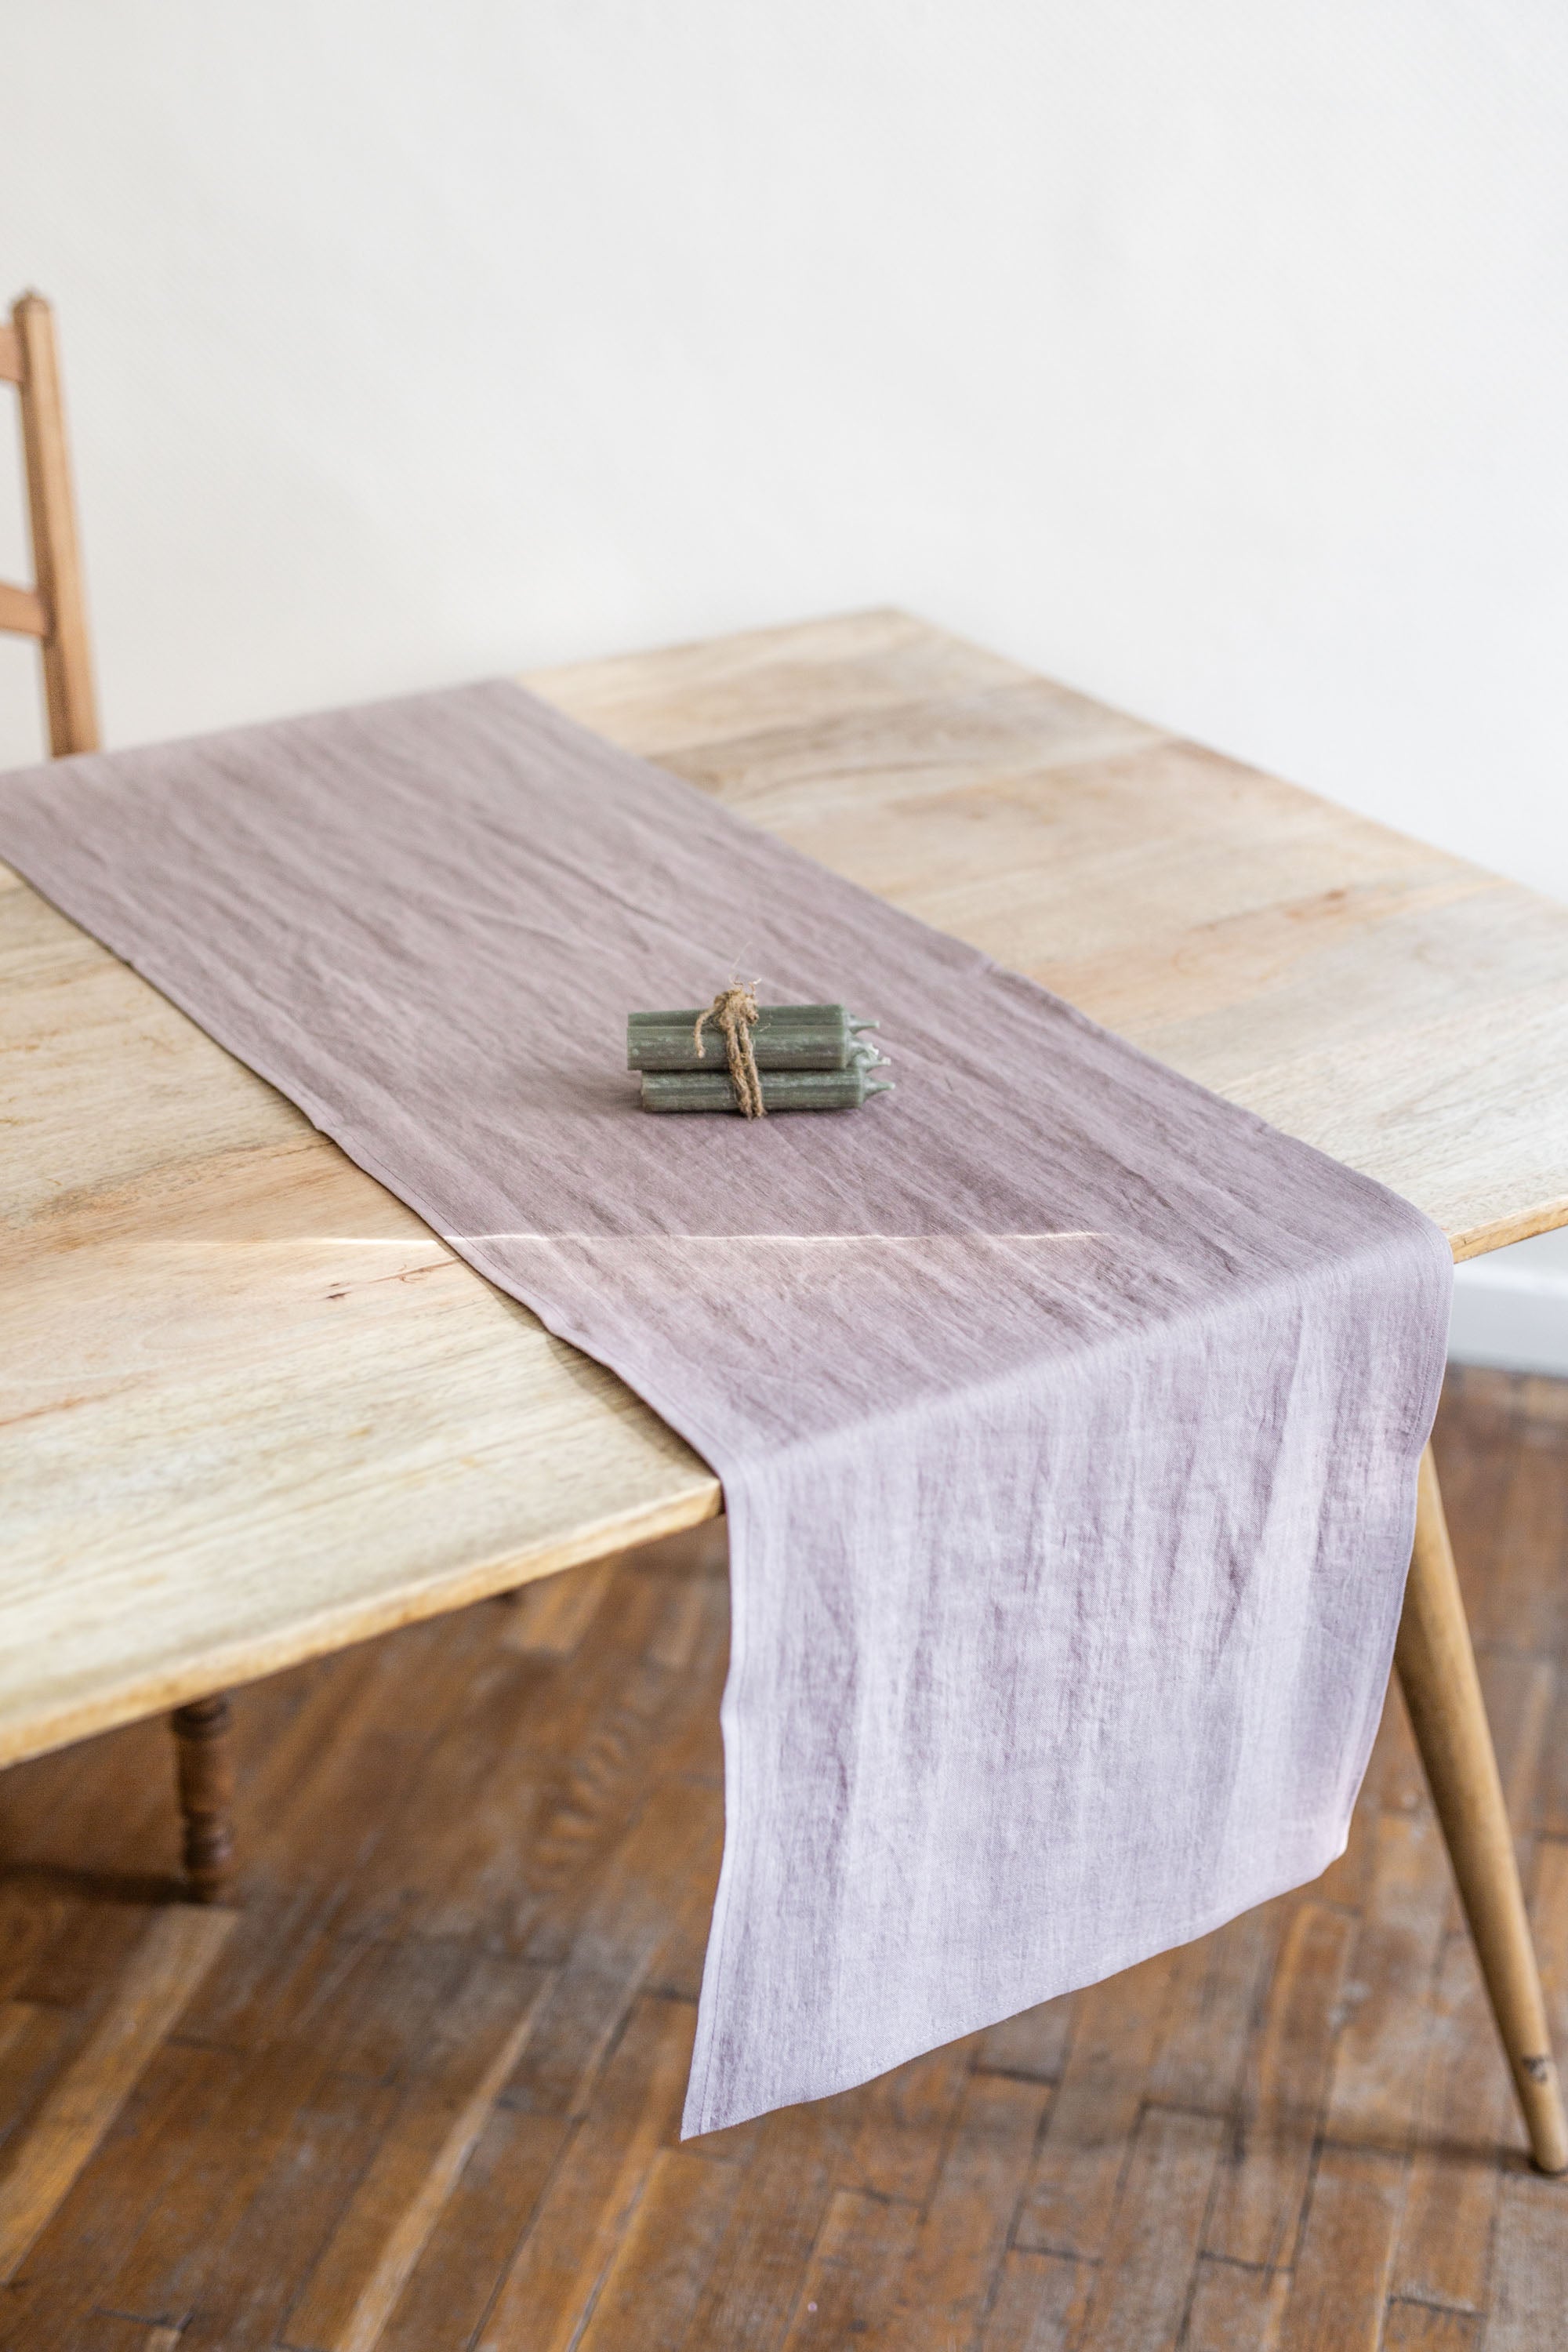 Dinner Table With Dusty Rose Linen Table Runner By AmourlInen